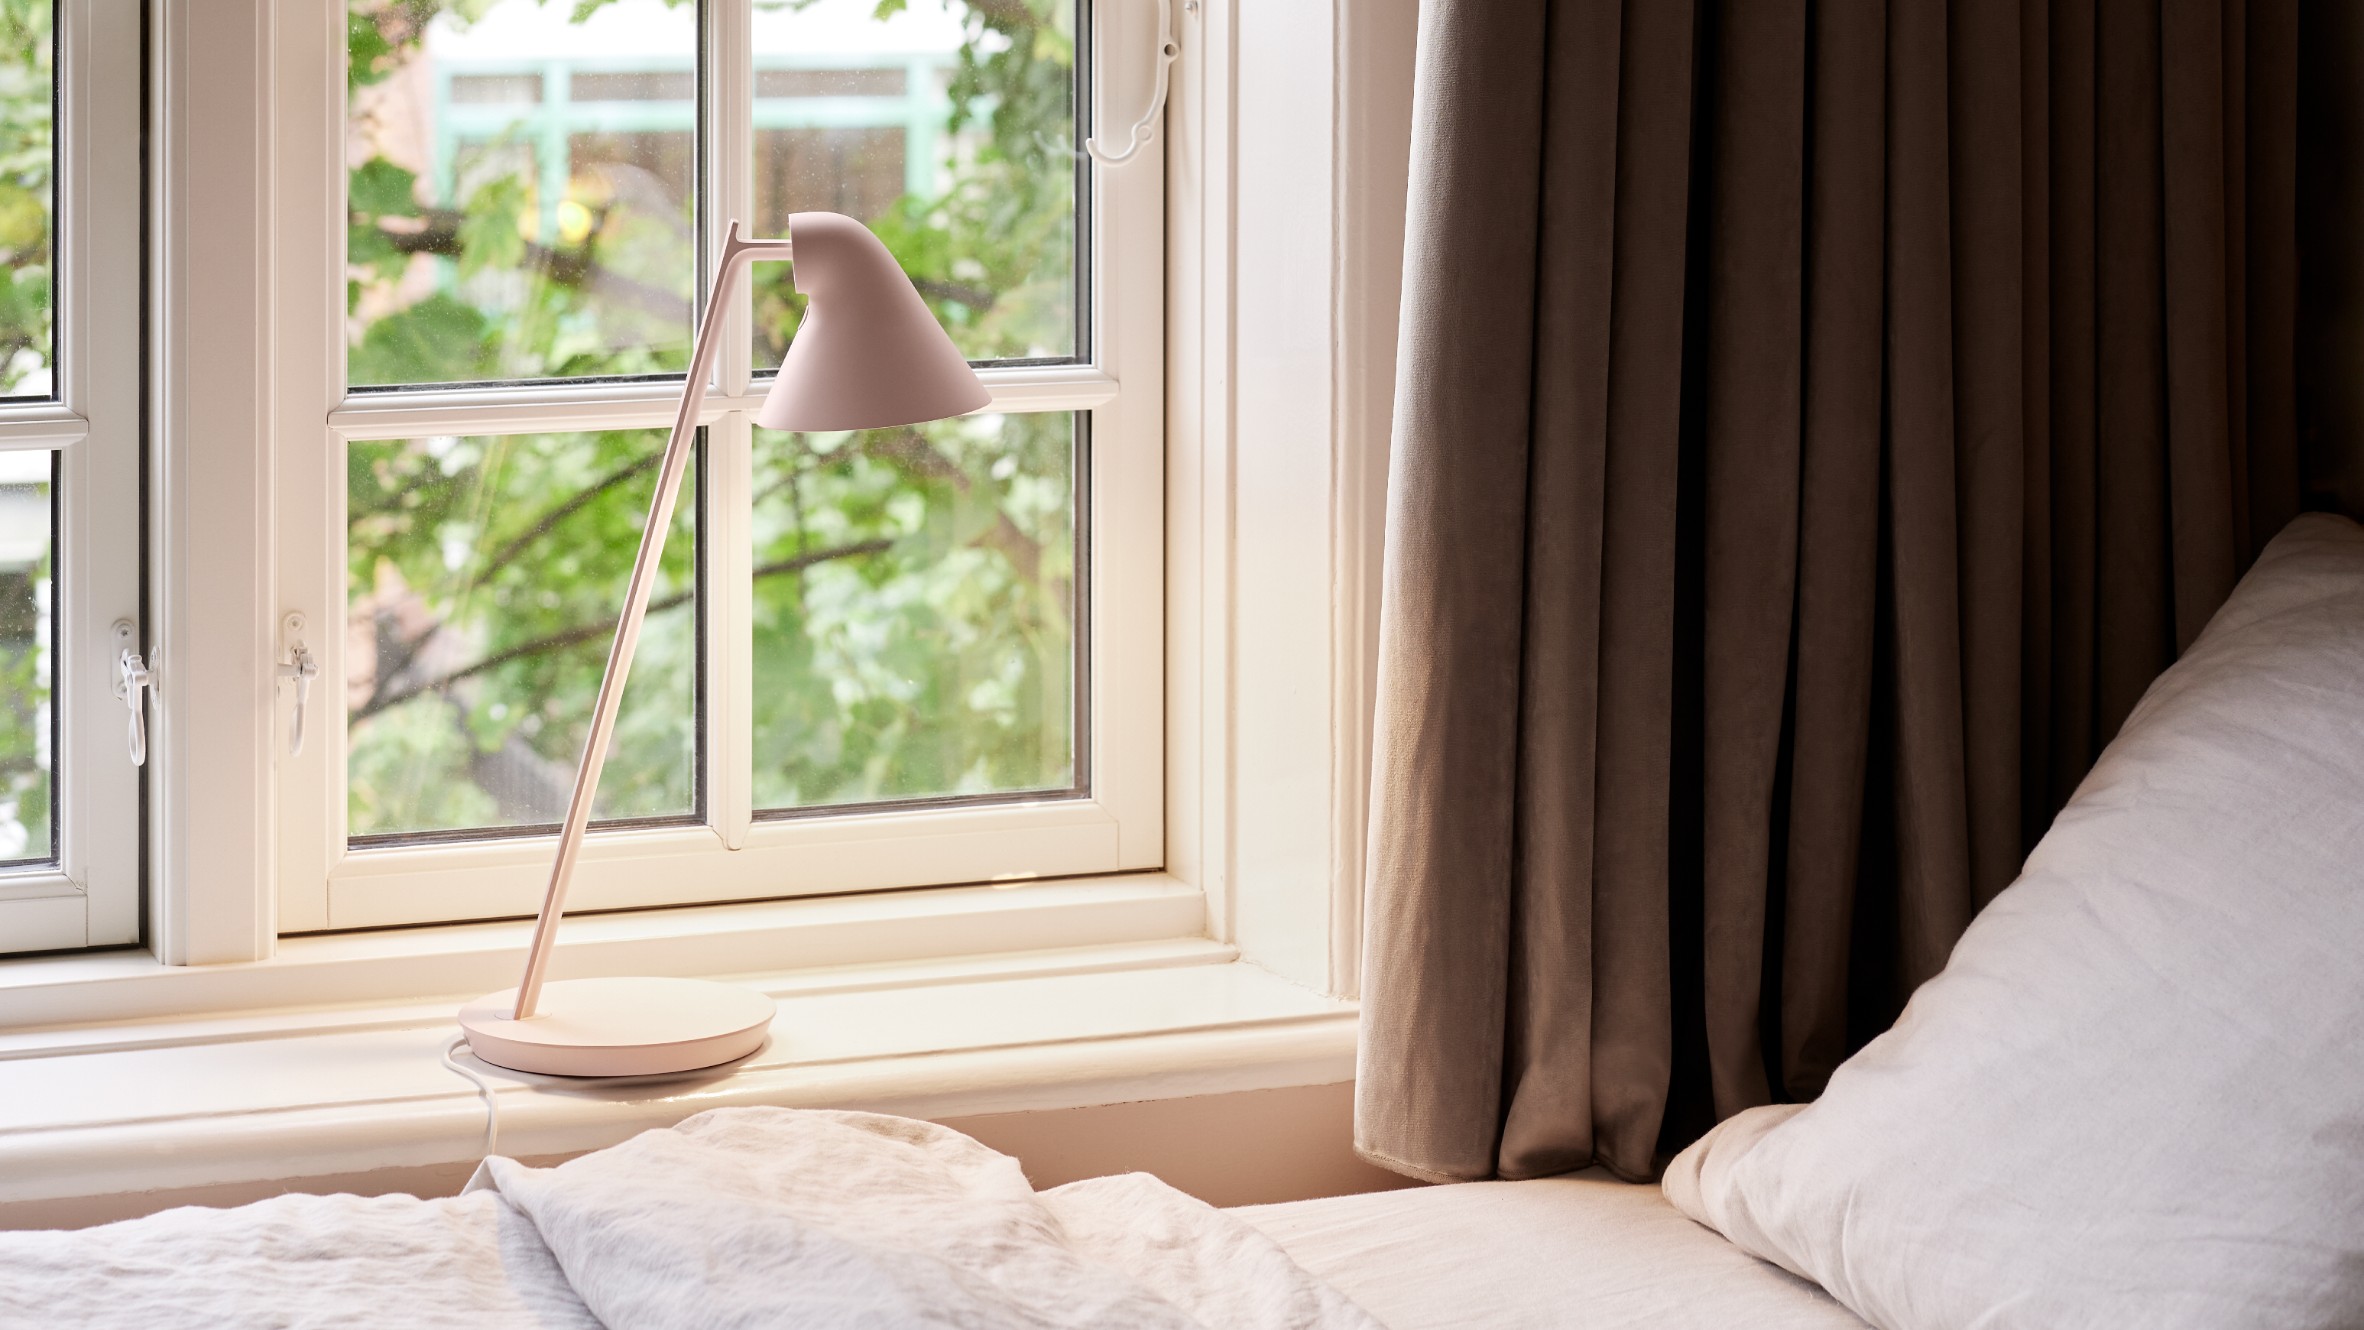 A photograph of the NJP Mini table lamp by Louis Poulsen in soft pink stands on a bedroom windowsill